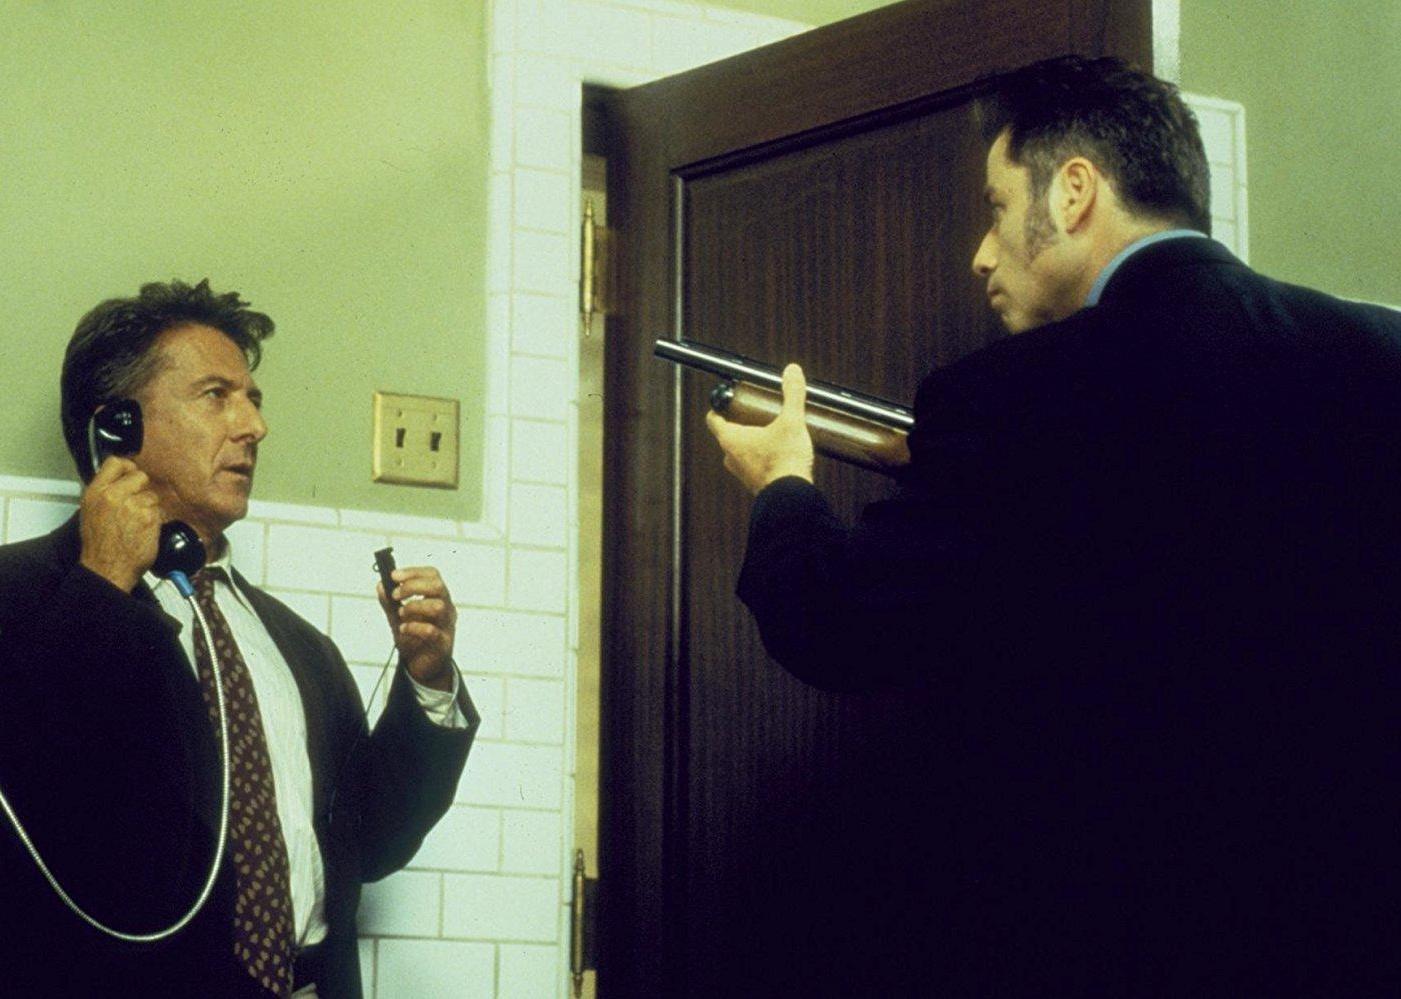 John Travolta holding a long gun up to Dustin Hoffman, who is on the phone.